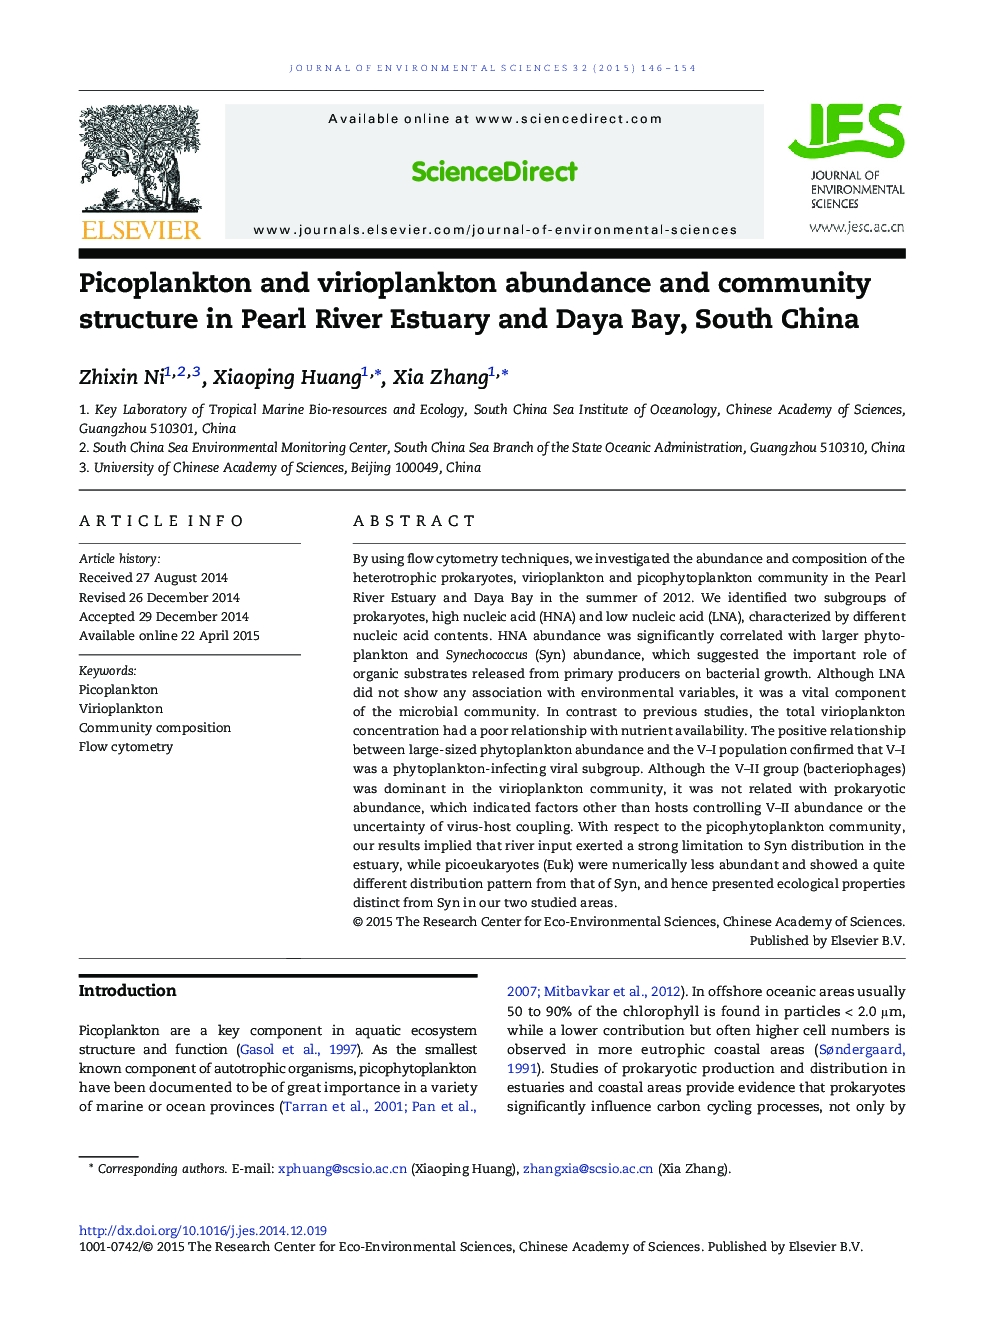 Picoplankton and virioplankton abundance and community structure in Pearl River Estuary and Daya Bay, South China